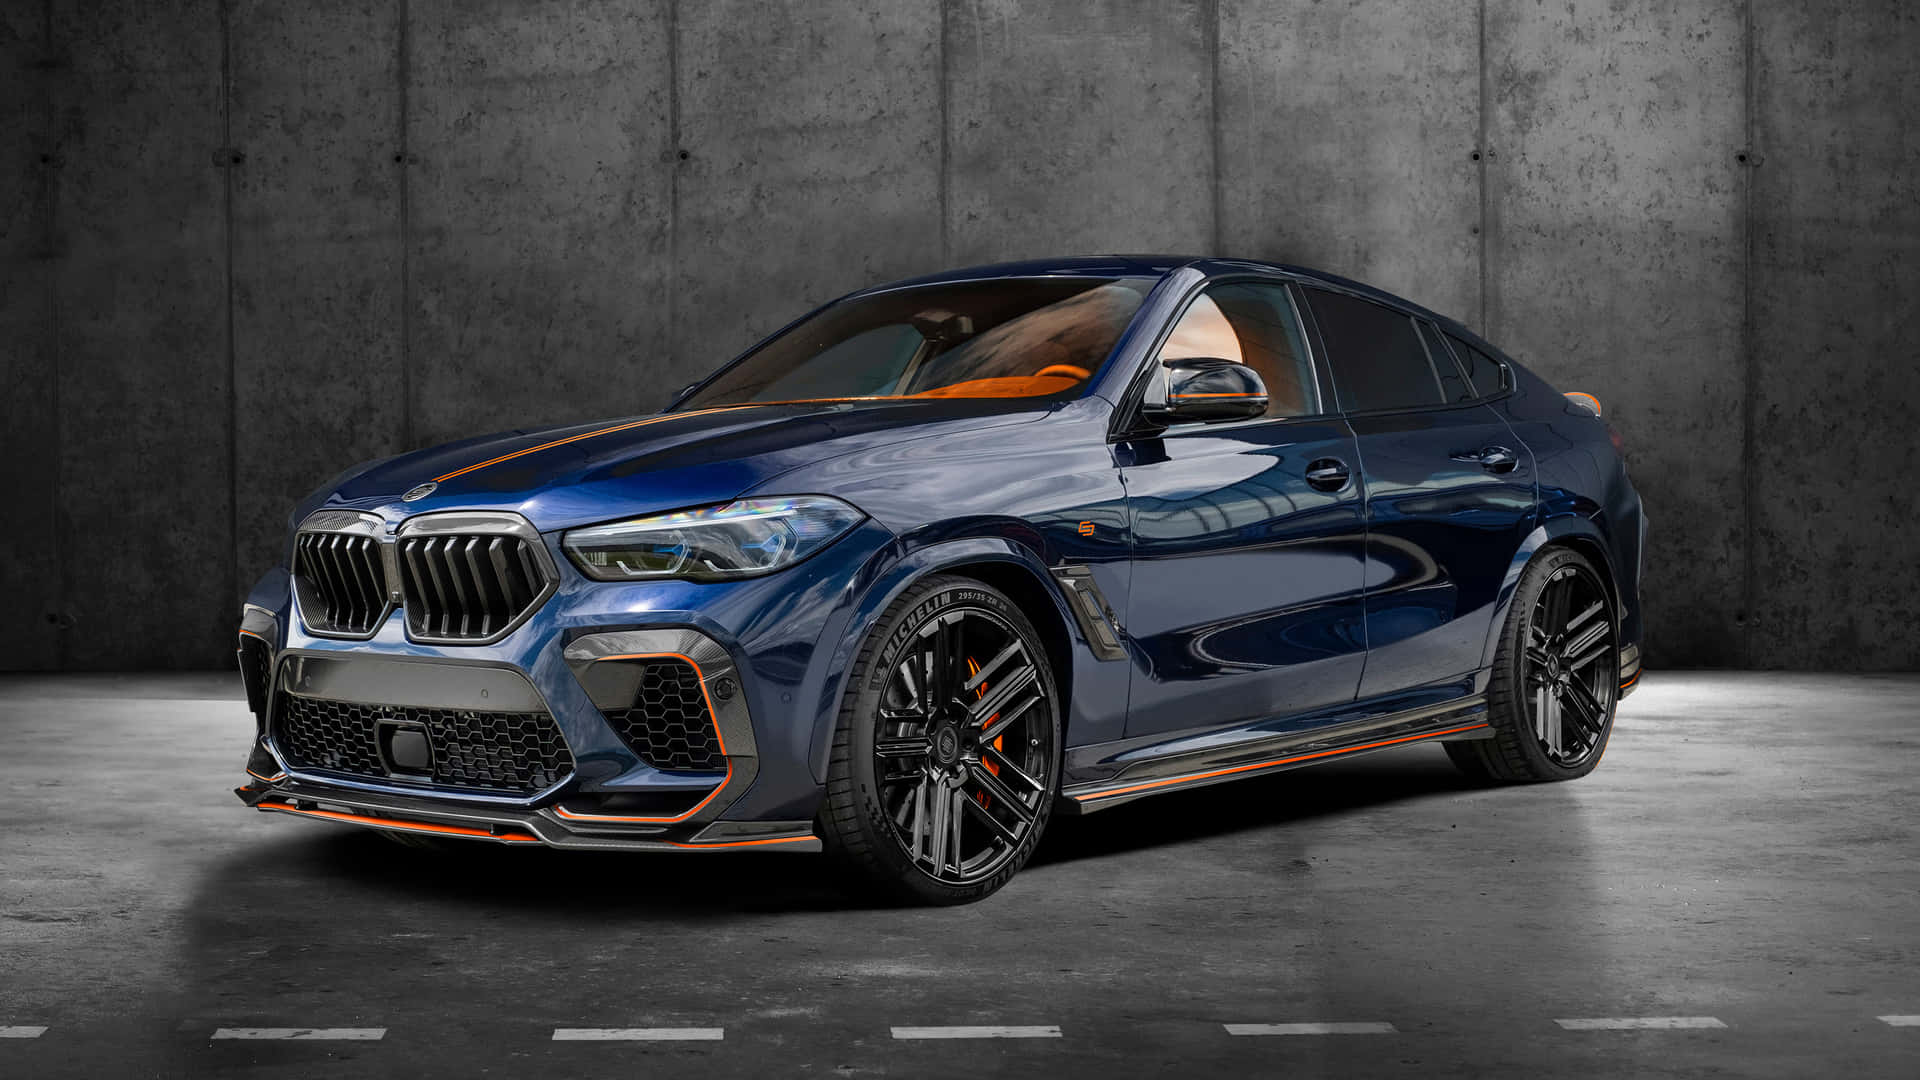 Power and performance on full display - the BMW X6 M